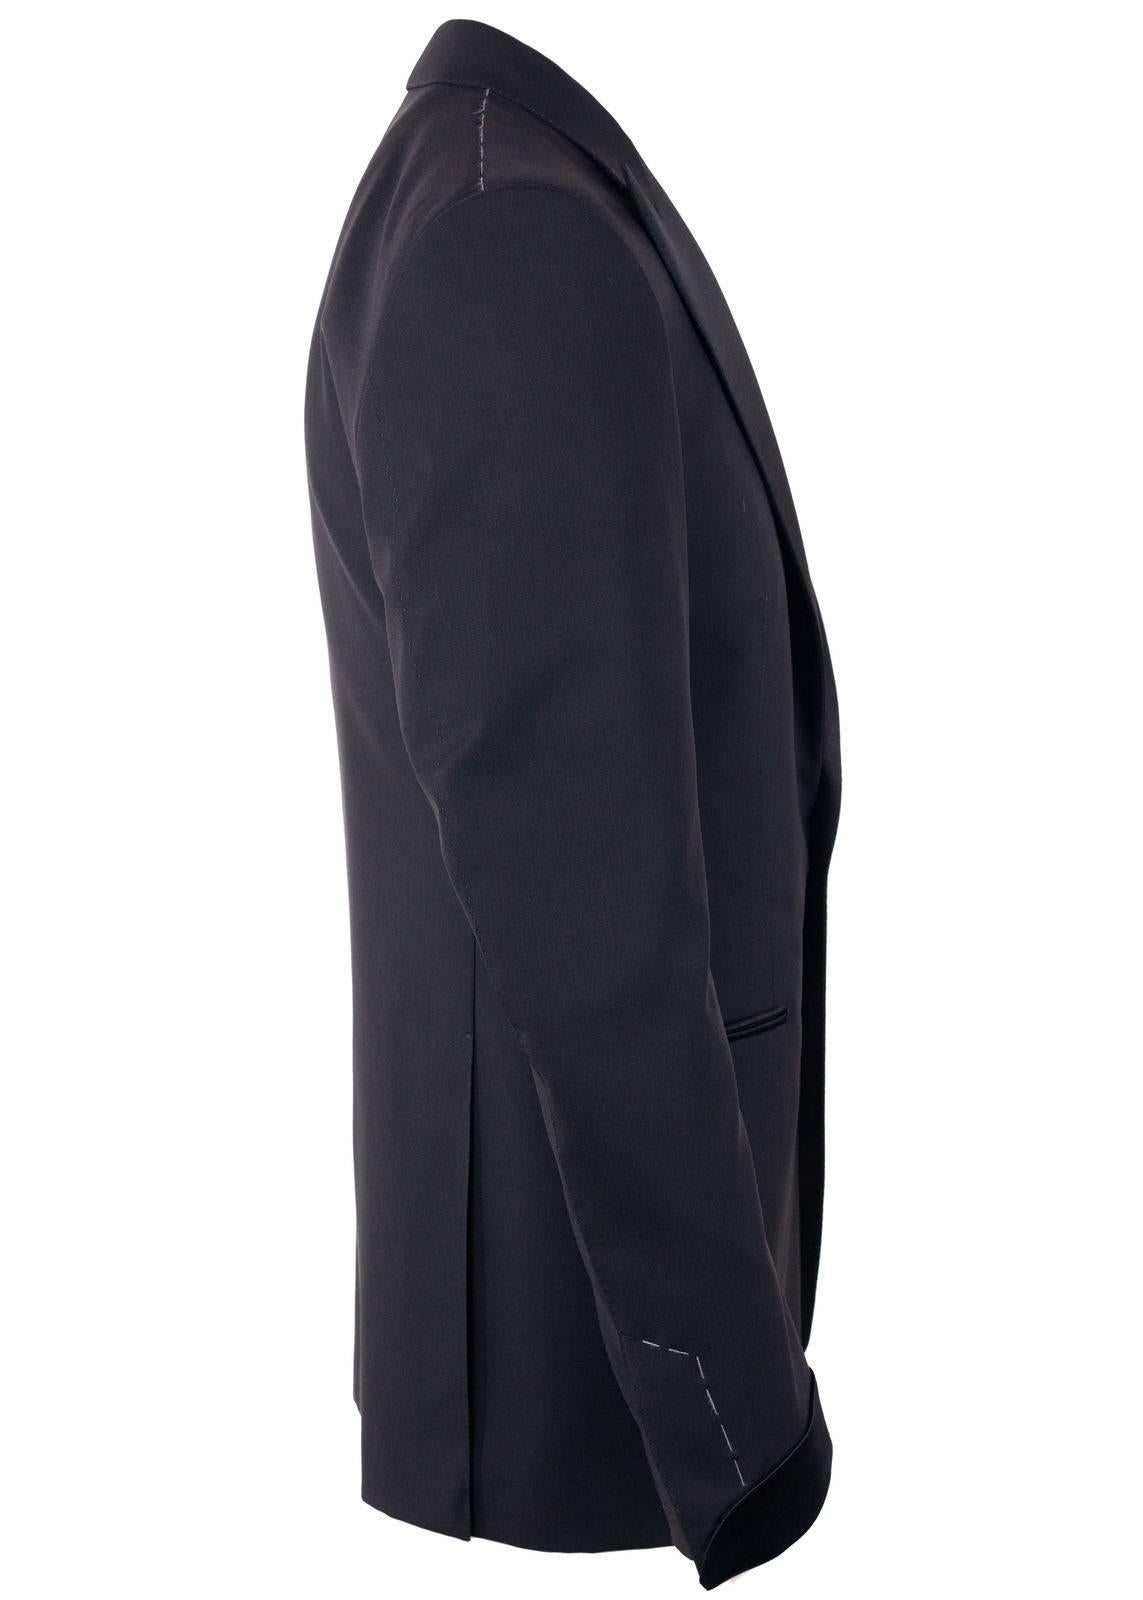  Tom Ford Black Wool Satin Lapel O 039 Connor Two Piece Tuxedo In Excellent Condition For Sale In Brooklyn, NY